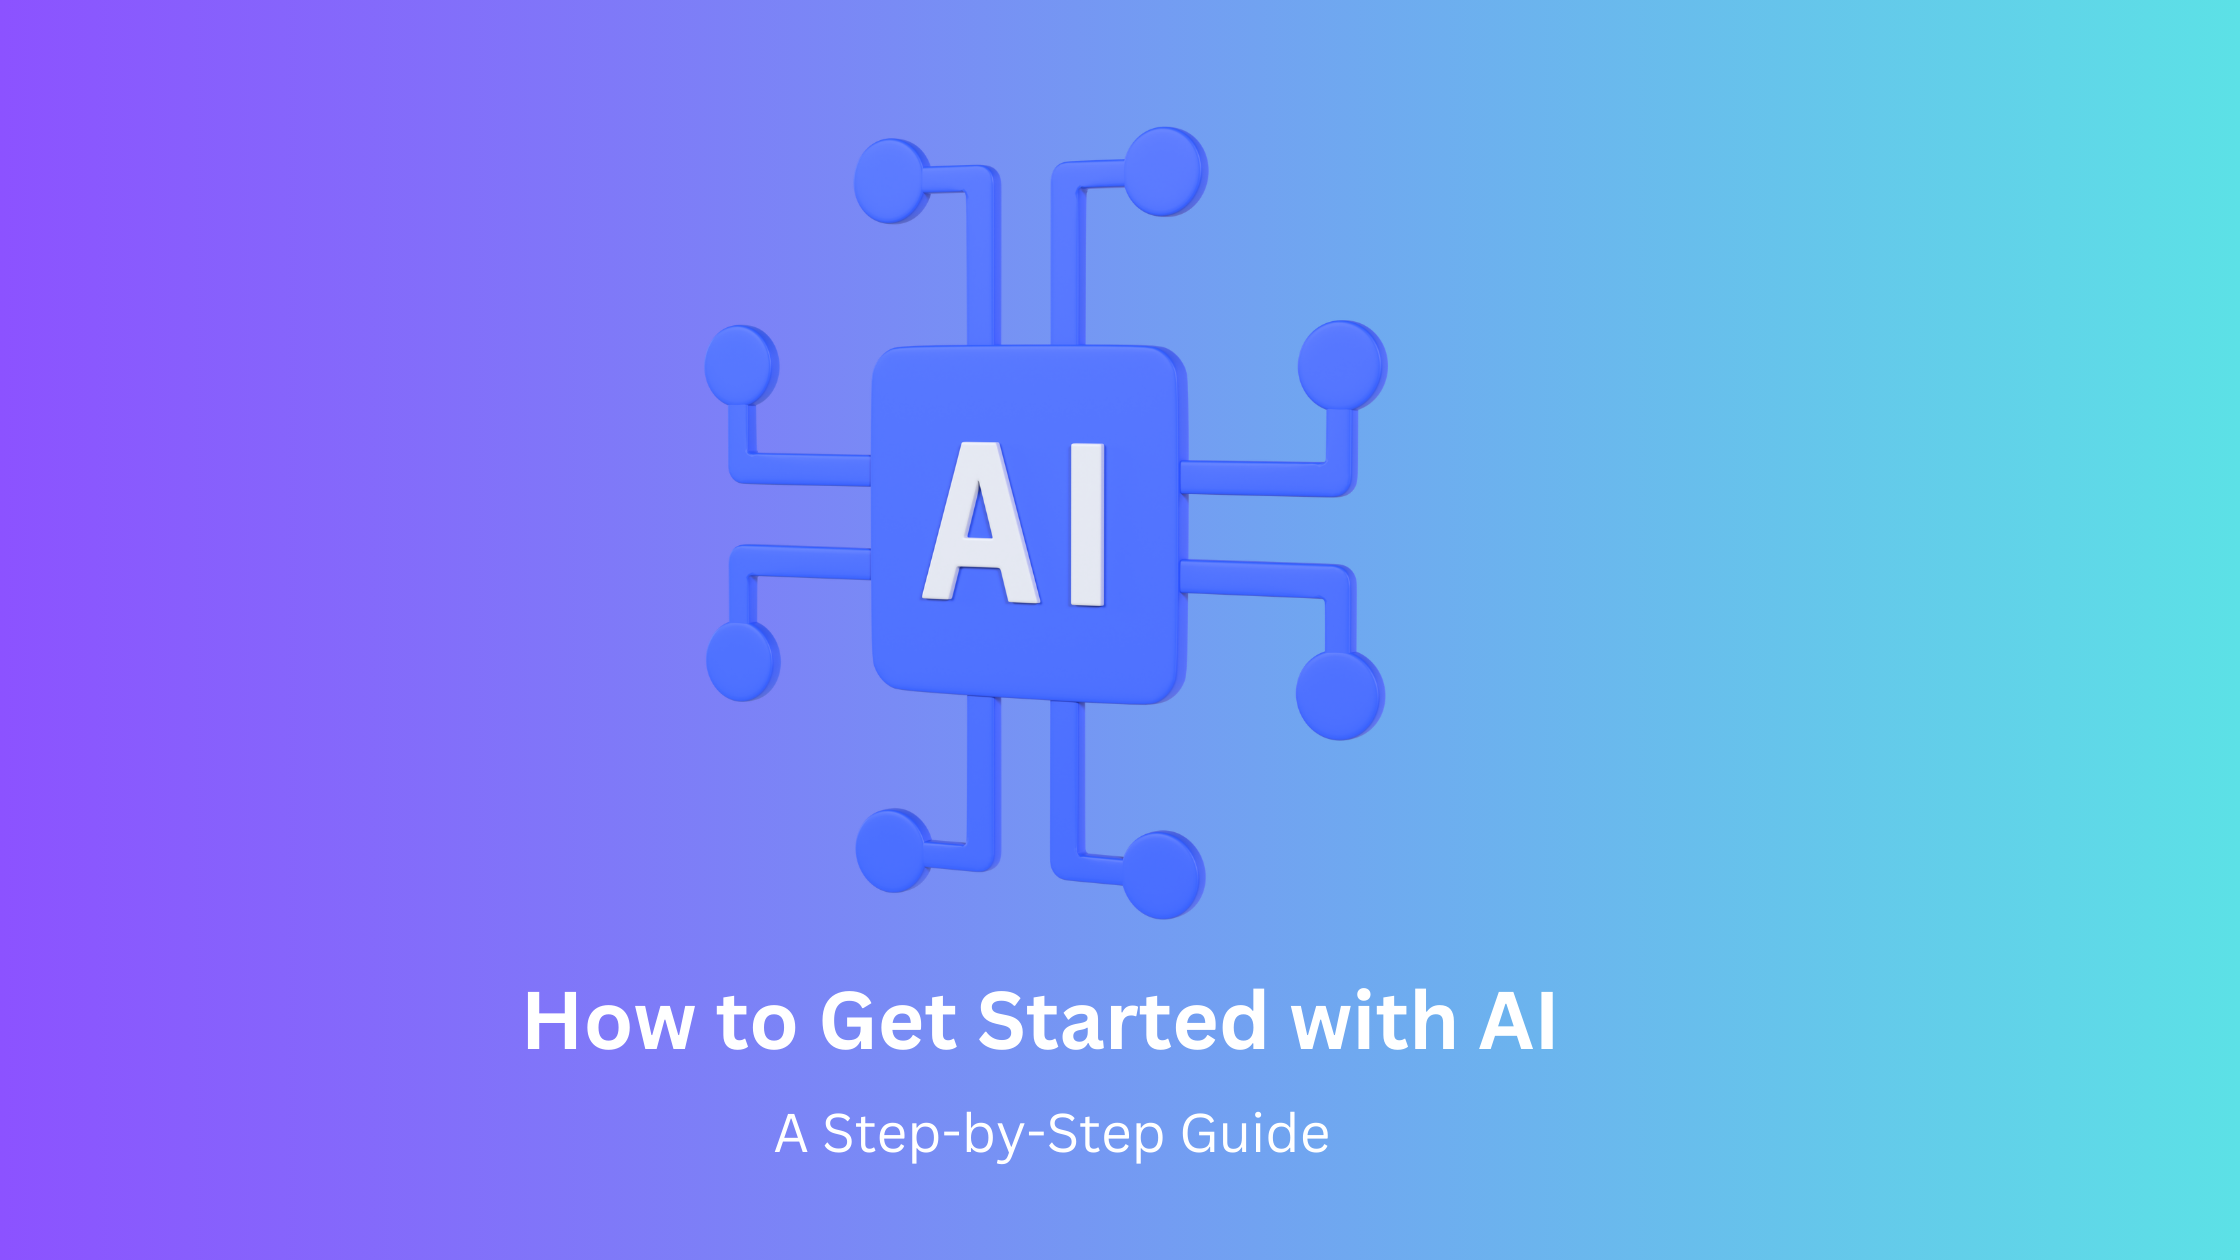 How to Get Started with Artificial Intelligence